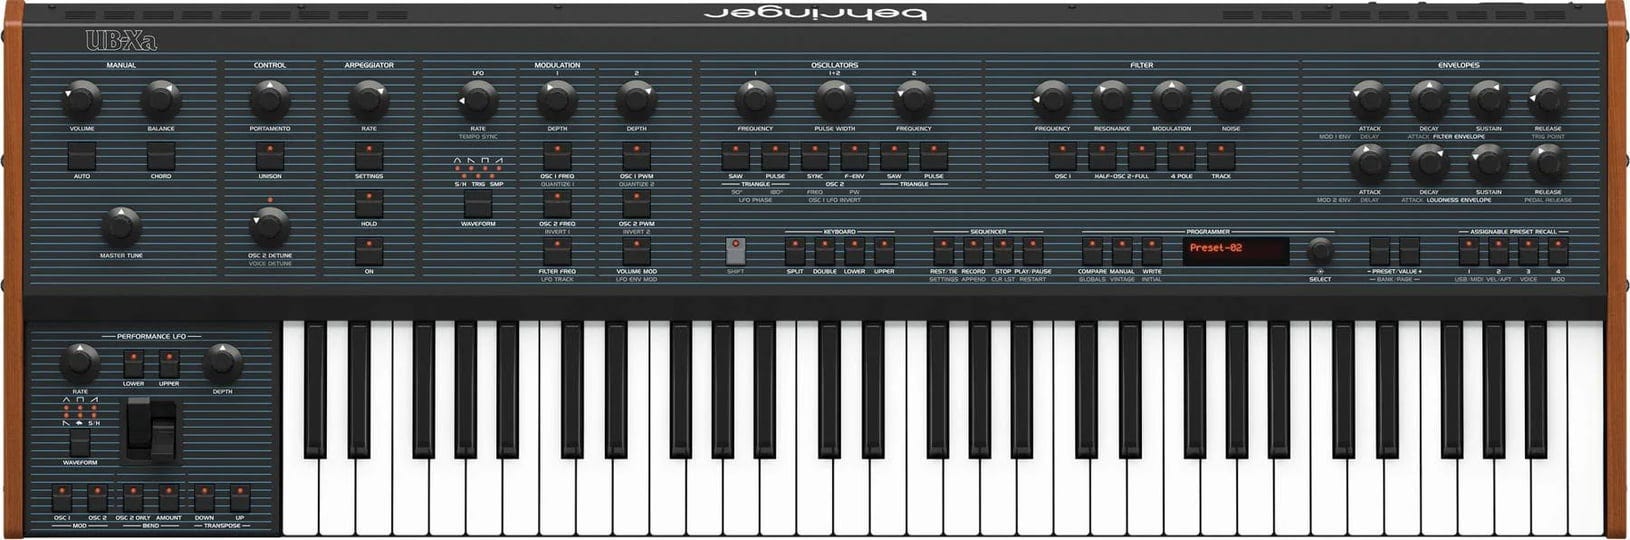 behringer-ub-xa-16-voice-bi-timbral-polyphonic-analog-synthesizer-1